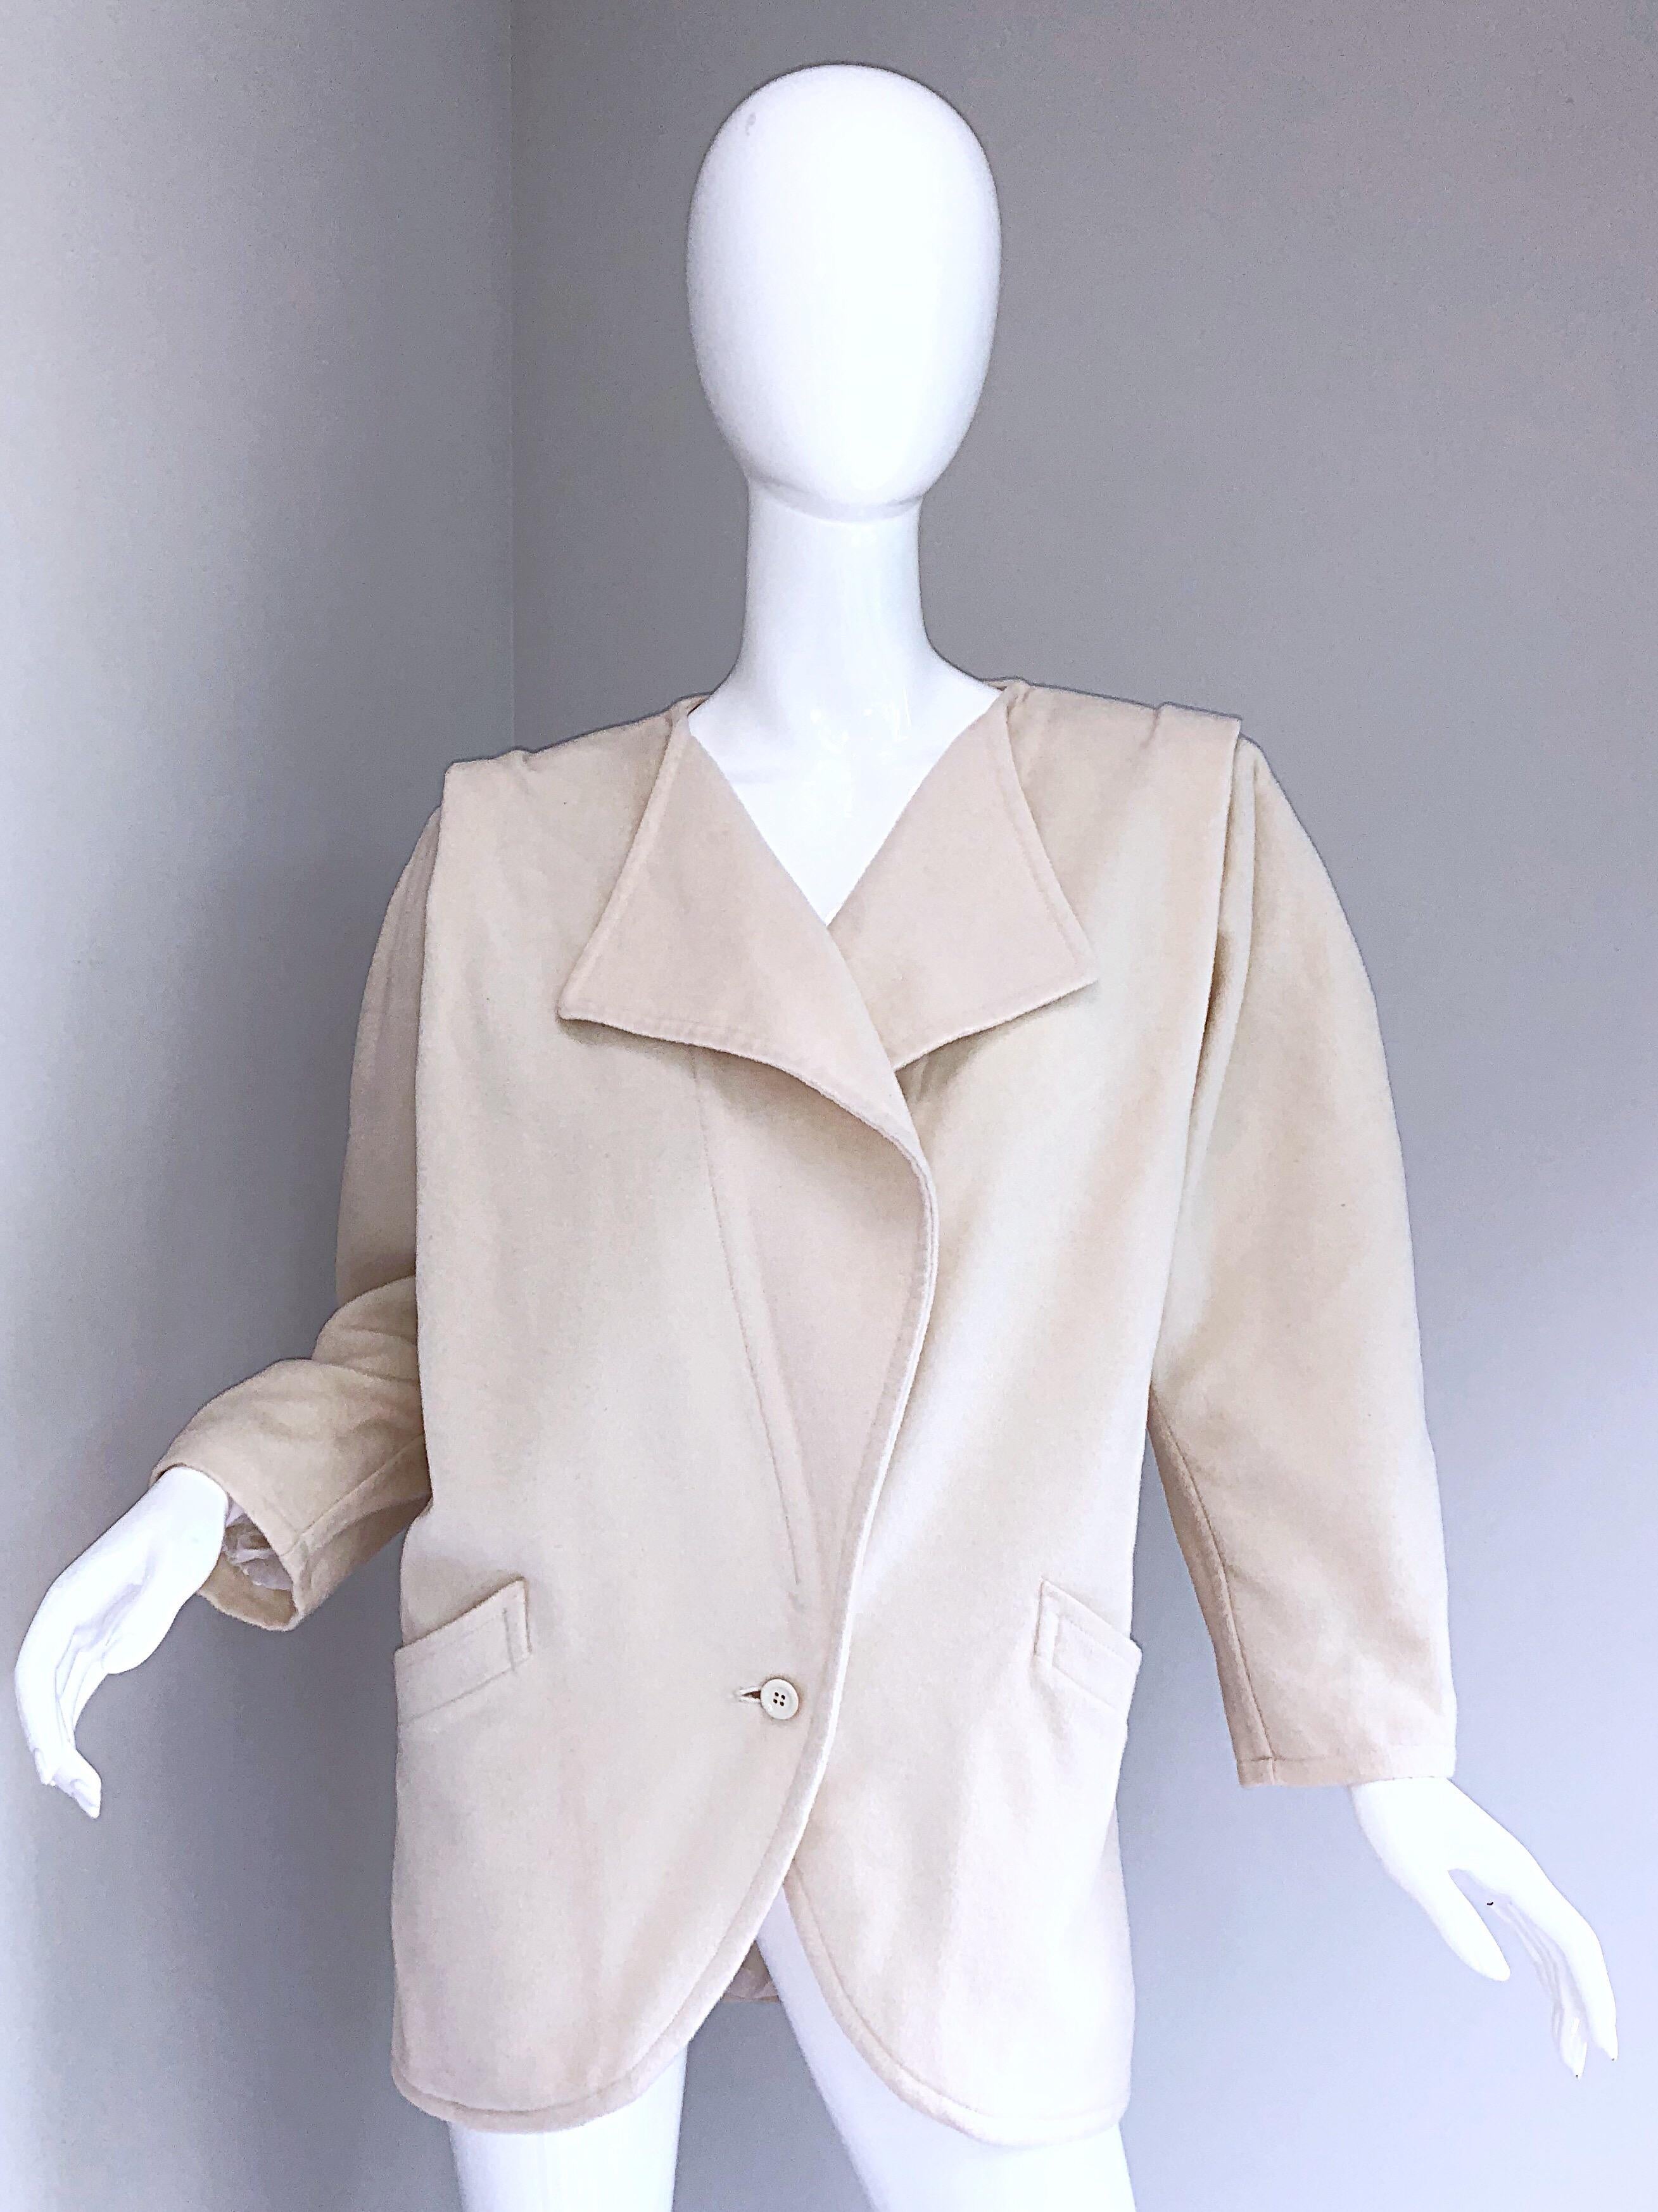 Fabulous and chic vintage 1980s EMANUEL UNGARO ivory / off - white virgin wool Avant Garde cocoon jacket! So much detail with even more style! Features a single button closure, and pockets at each side of the waist. Built in dramatic shoulder pads.